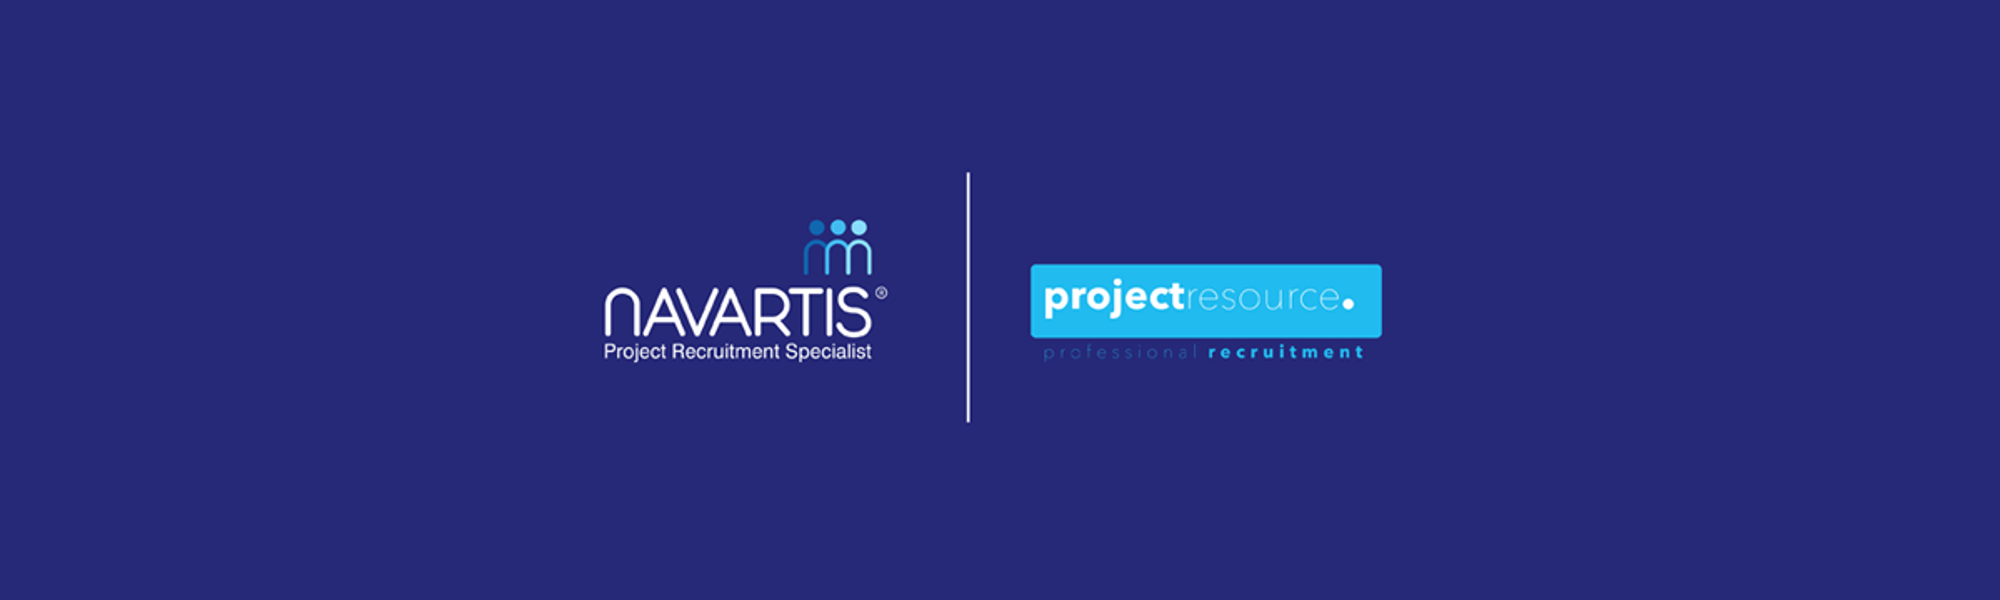 Navartis Acquires White Collar Recruitment Experts Project Resource 